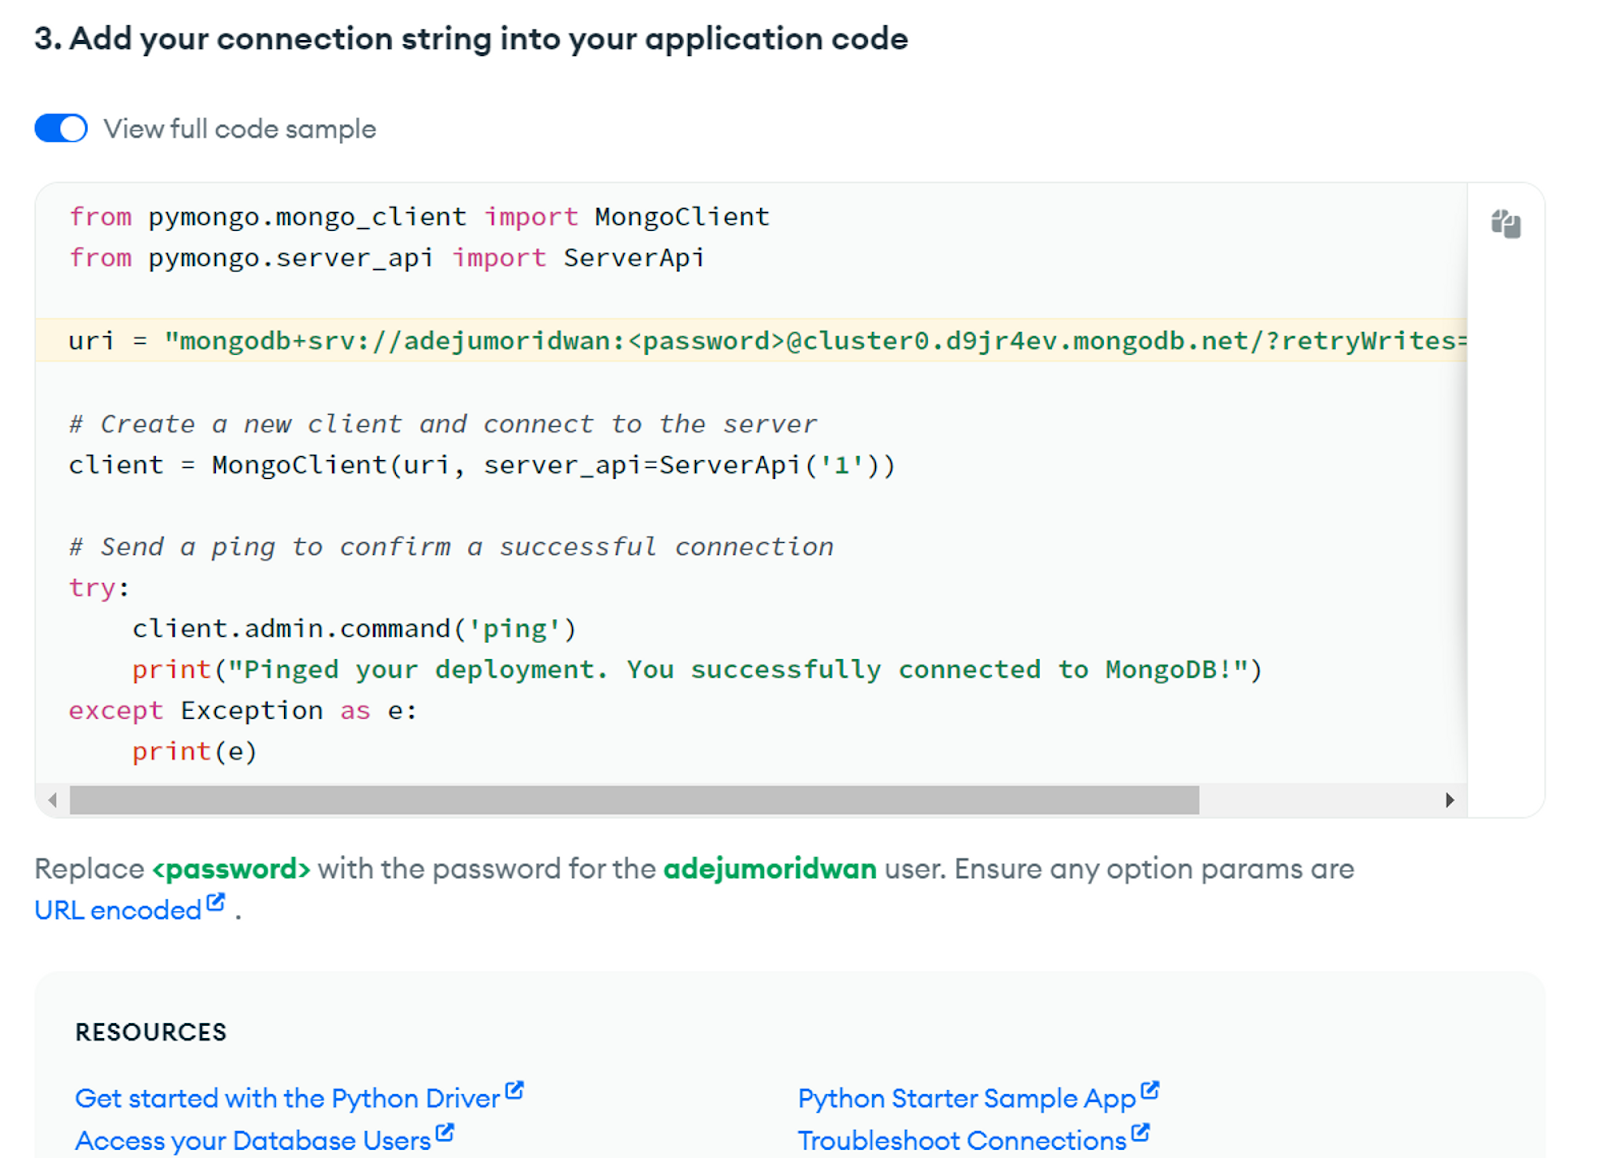 This image shows the code on how to connect to the MongoDB server using the pymongo driver.